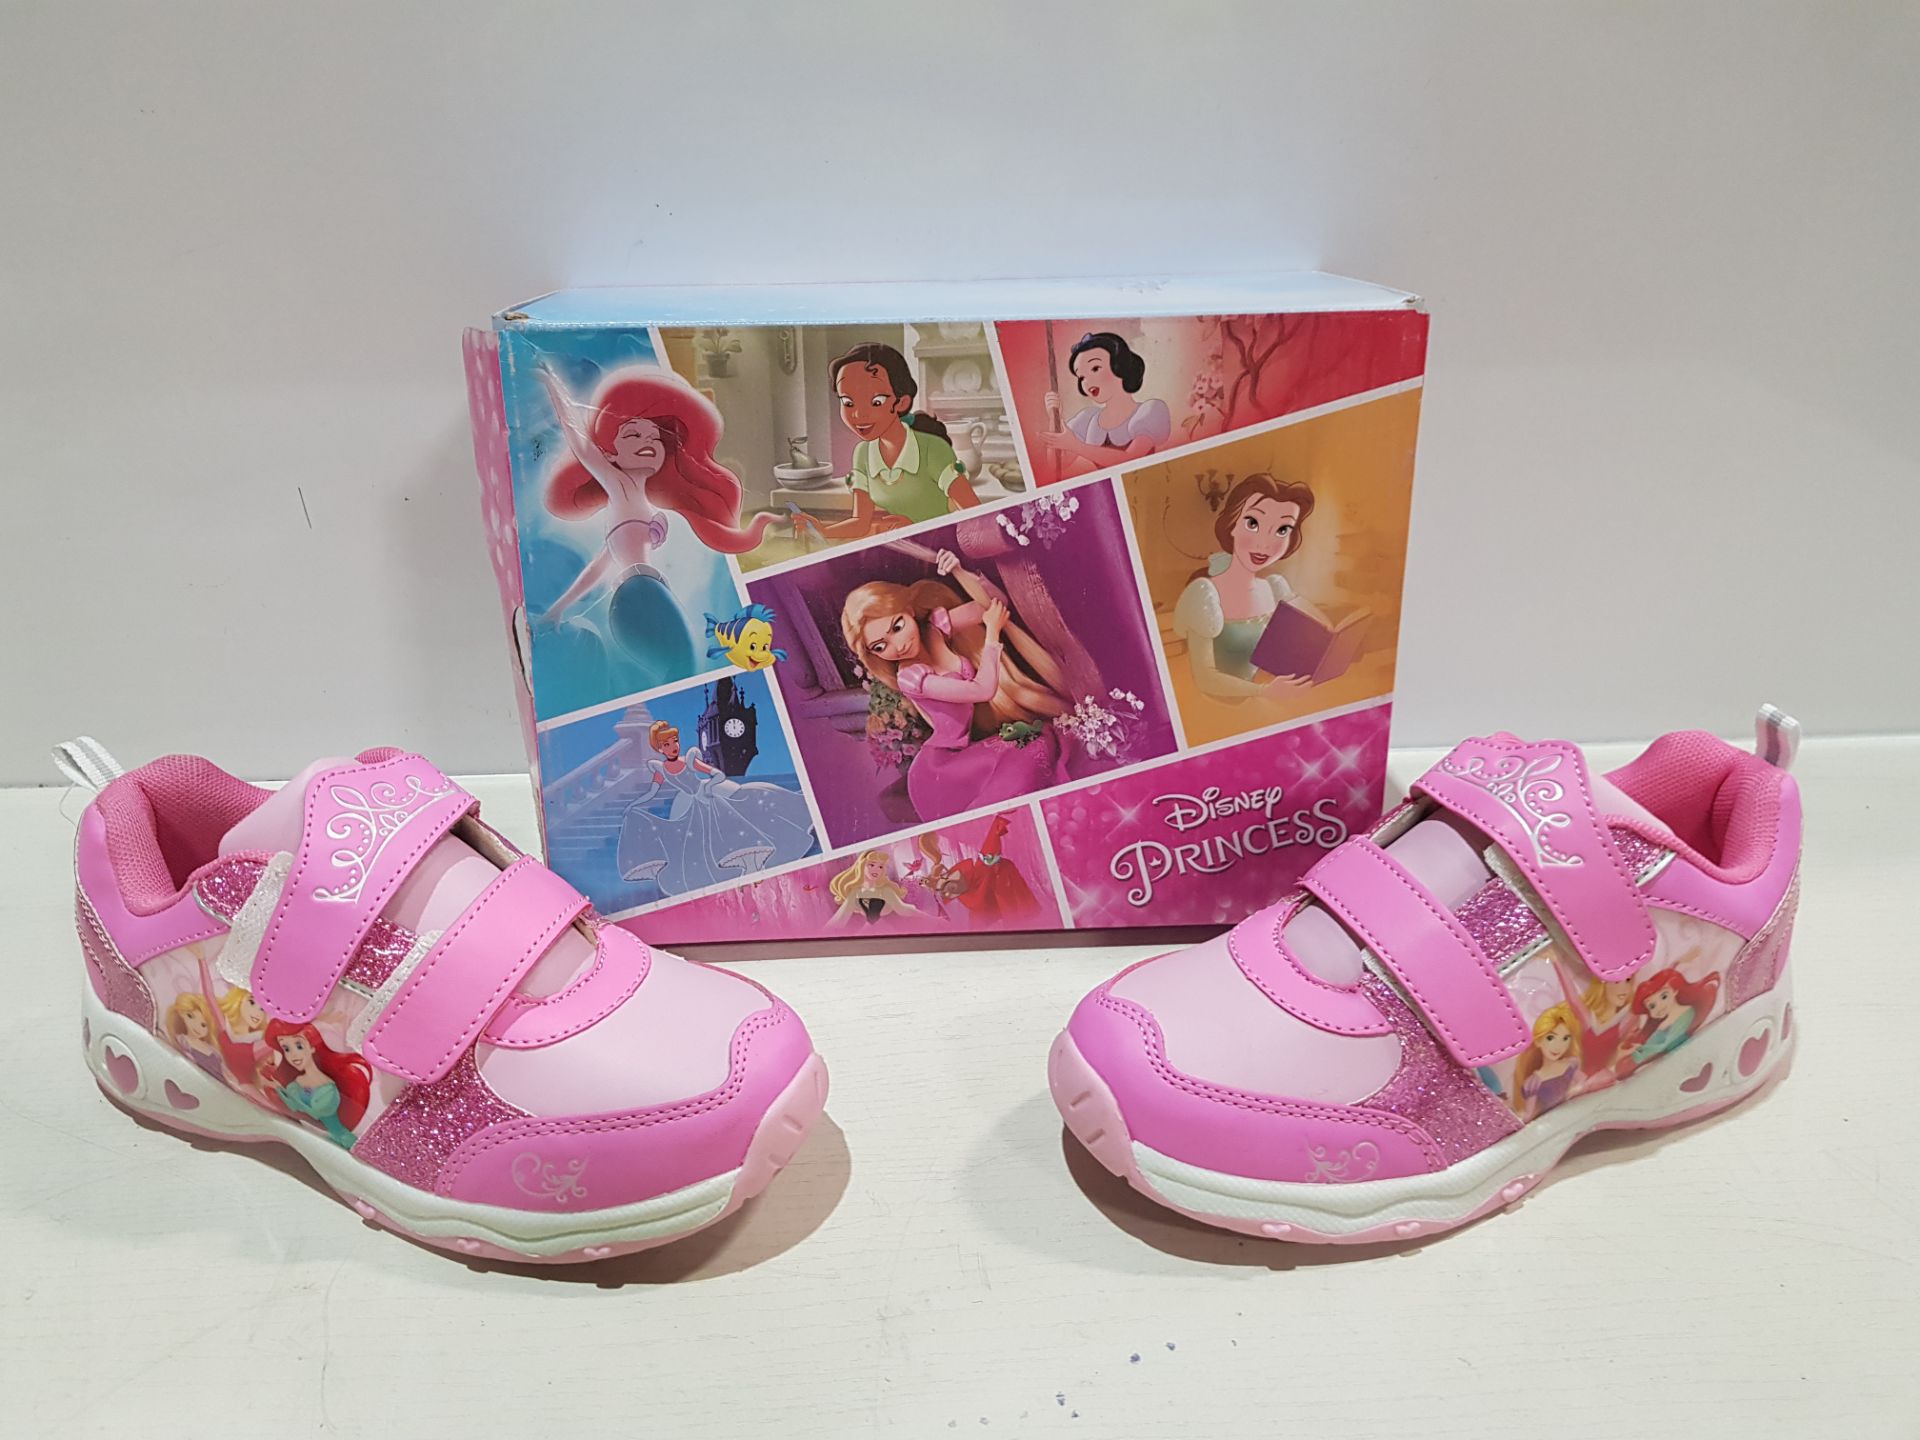 11 X BRAND NEW DISNEY PRINCESS INFANT TRAINERS IN SIZES C5, C12, UK1, UK2 (PLEASE NOTE SOME BOXES